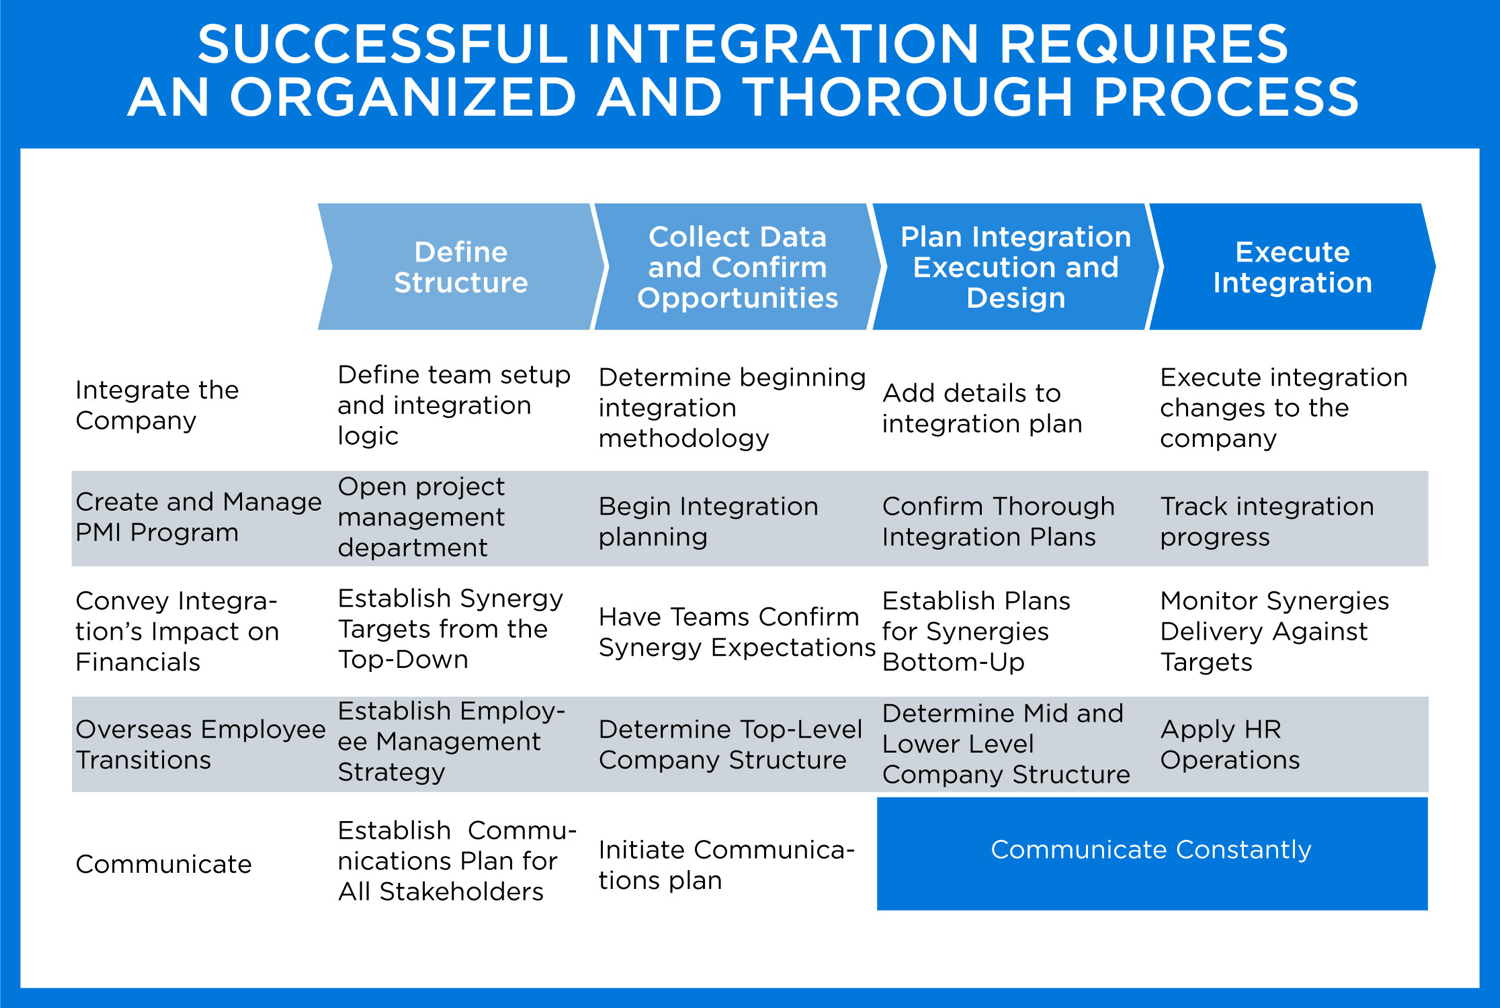 M&A Integration: Post-Merger Integration Process Guide (11) With Integration Checklist Template Within Integration Checklist Template